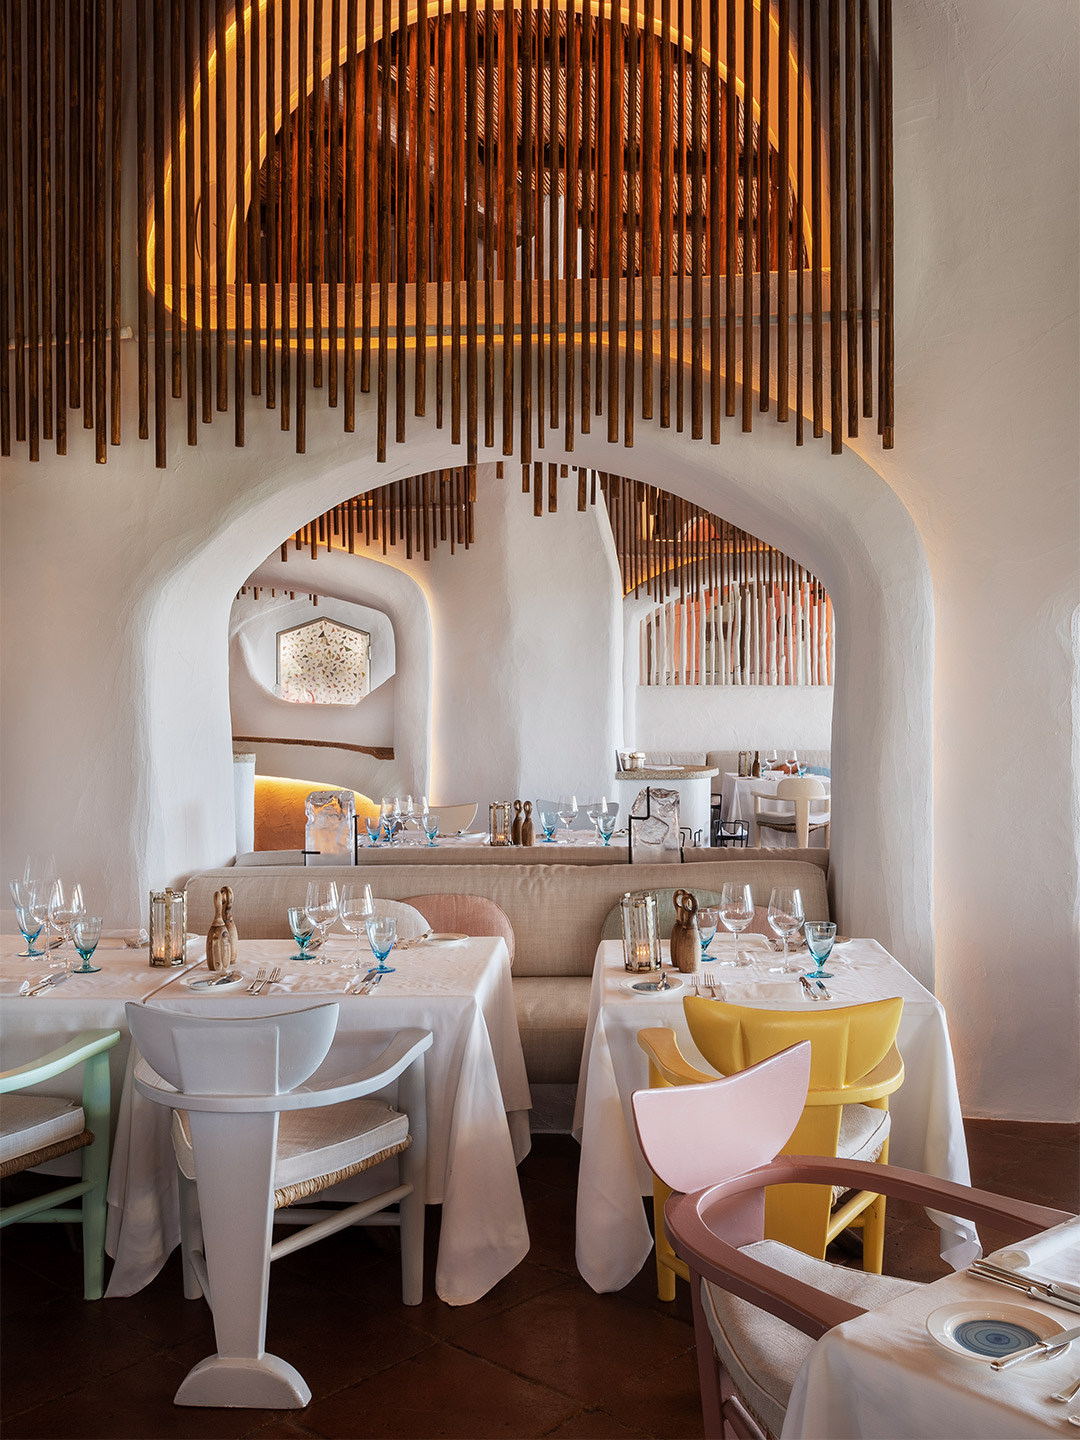 Cala di Volpe hotel in Sardinia by Moinard Bétaille Agency